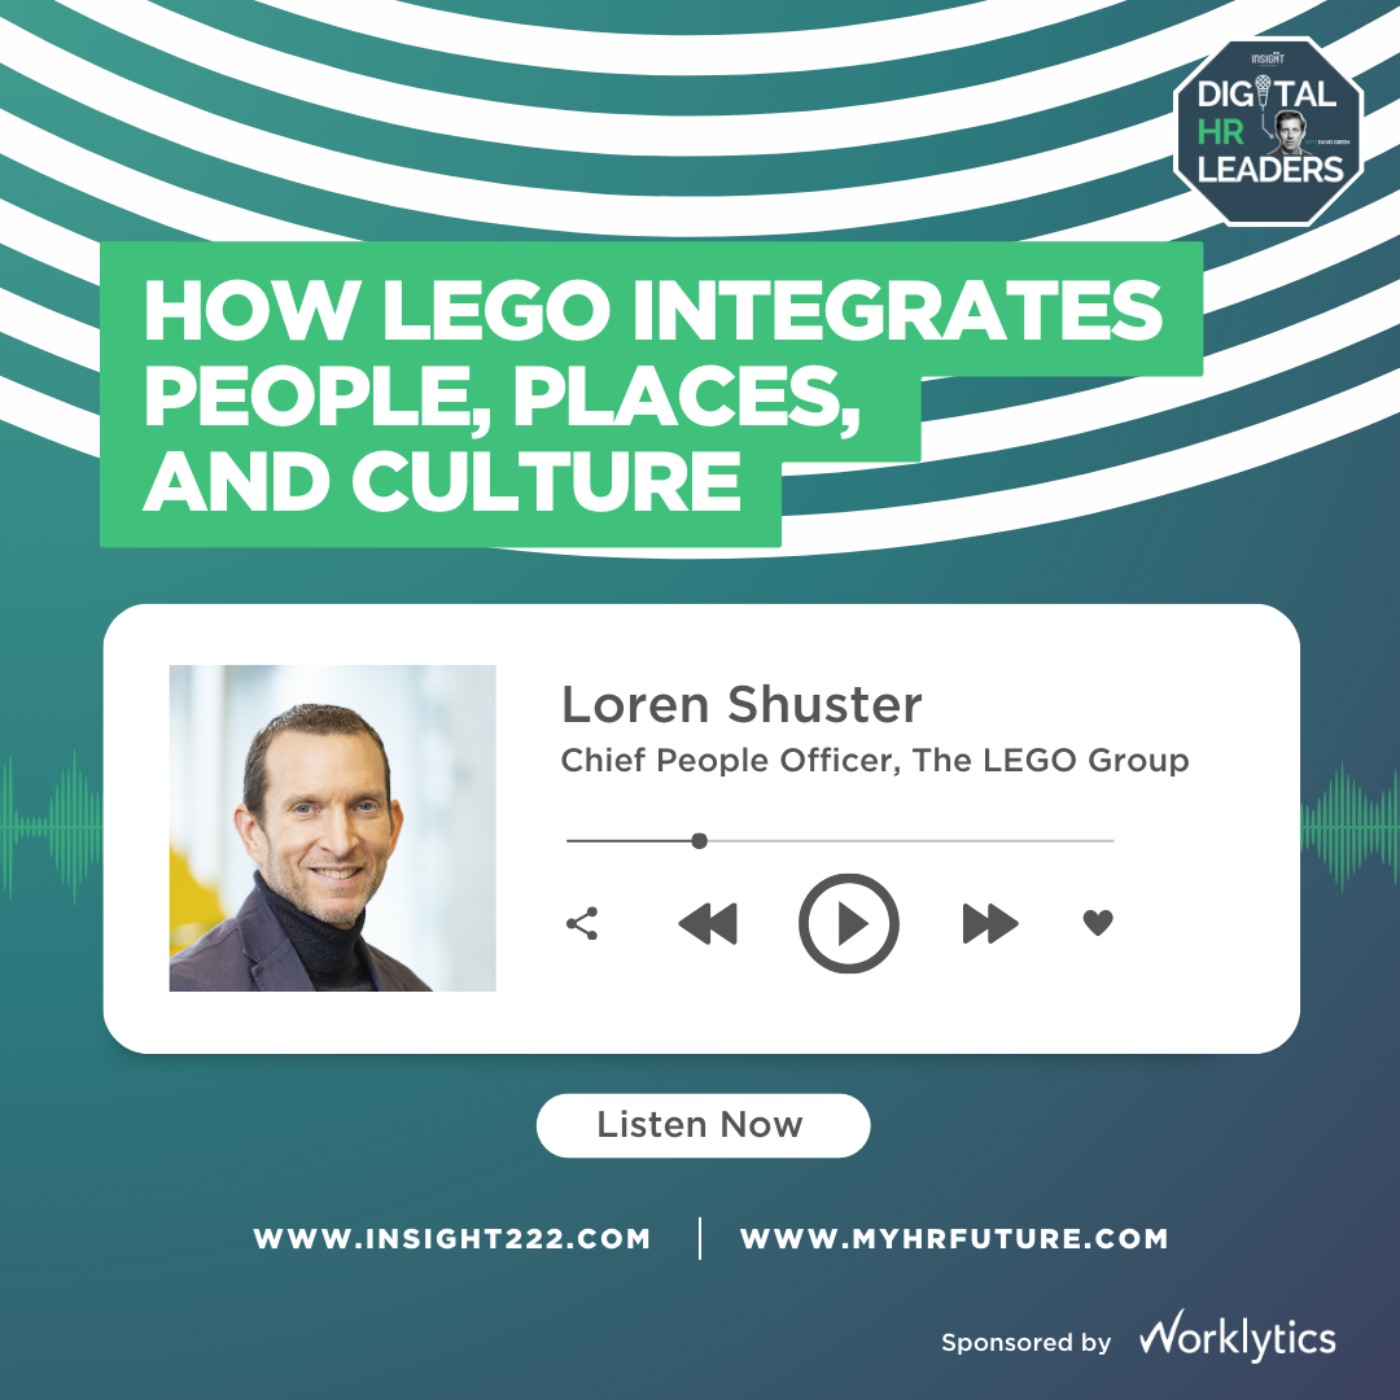 How LEGO Integrates People, Places, and Culture (an Interview with Loren Shuster)